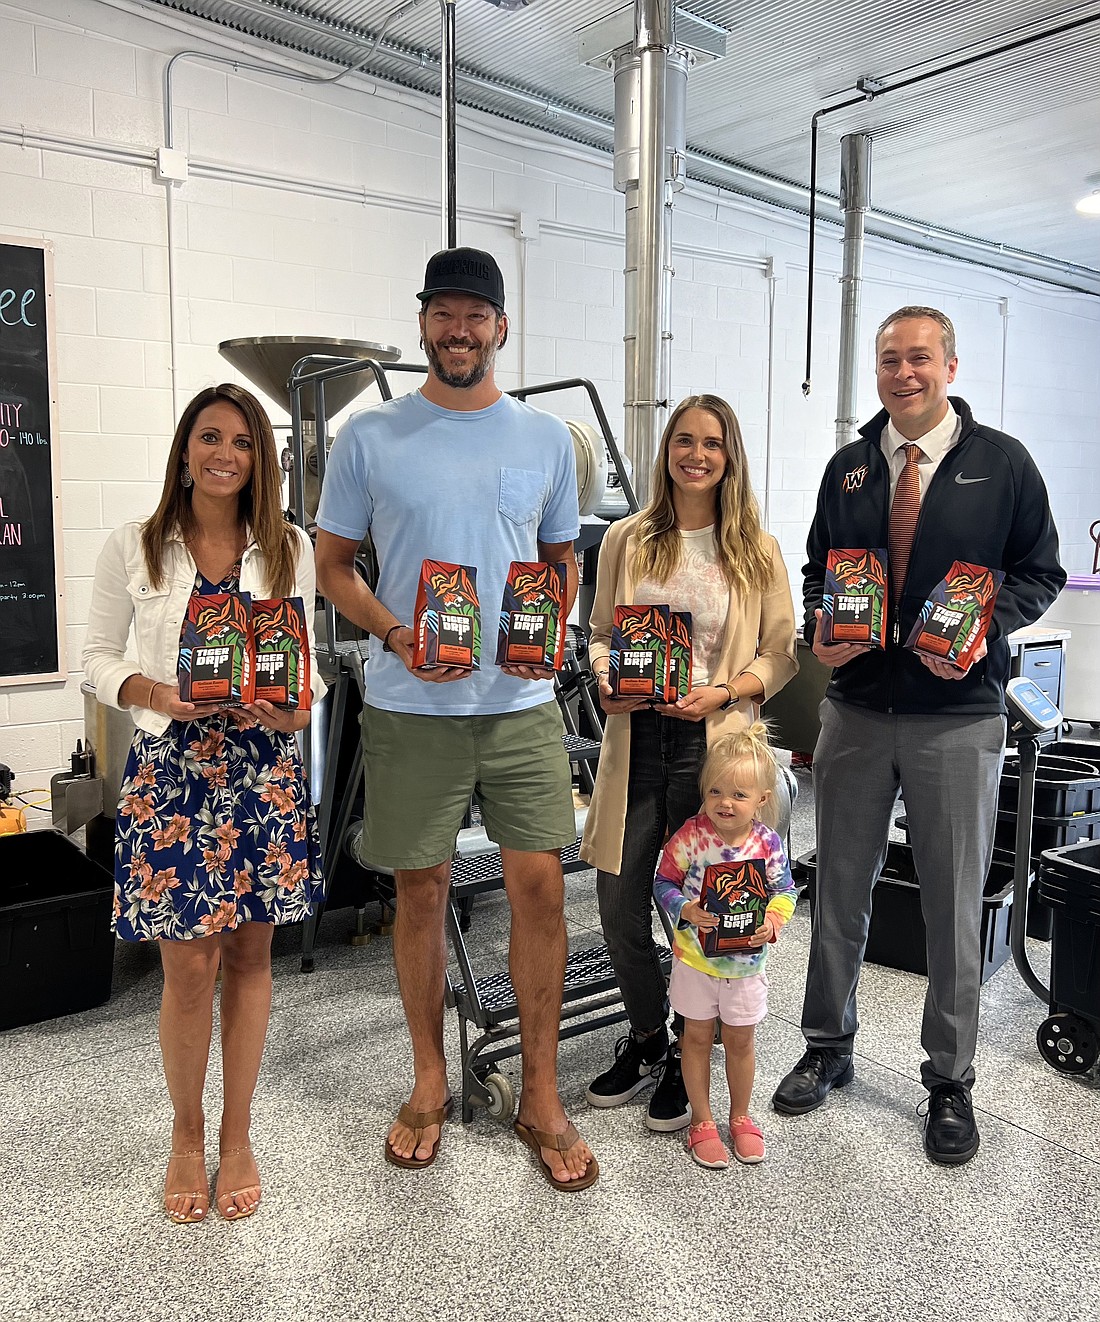 Pictured (L to R) are Krista Polston, Warsaw Community Schools director of communications; Tyler Silveus, Generous Coffee co-founder, Lia Geiger, graphic designer; and Dr. David Hoffert, WCS superintendent. Photo Provided.